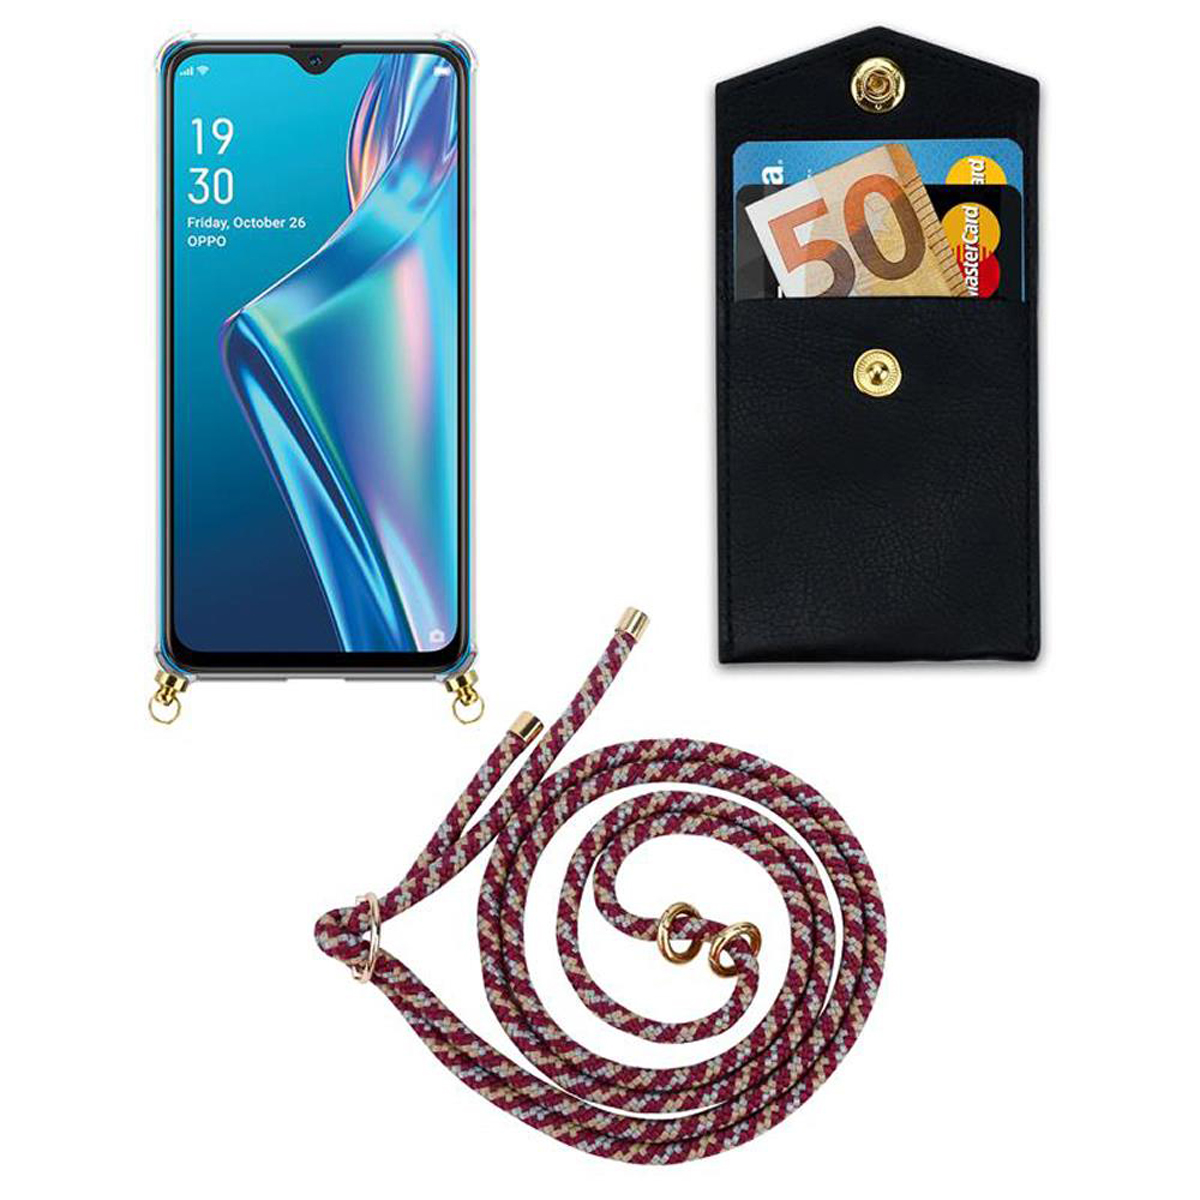 Handy Gold Hülle, GELB ROT A12, Kordel Ringen, Oppo, WEIß abnehmbarer mit Band Kette CADORABO Backcover, und